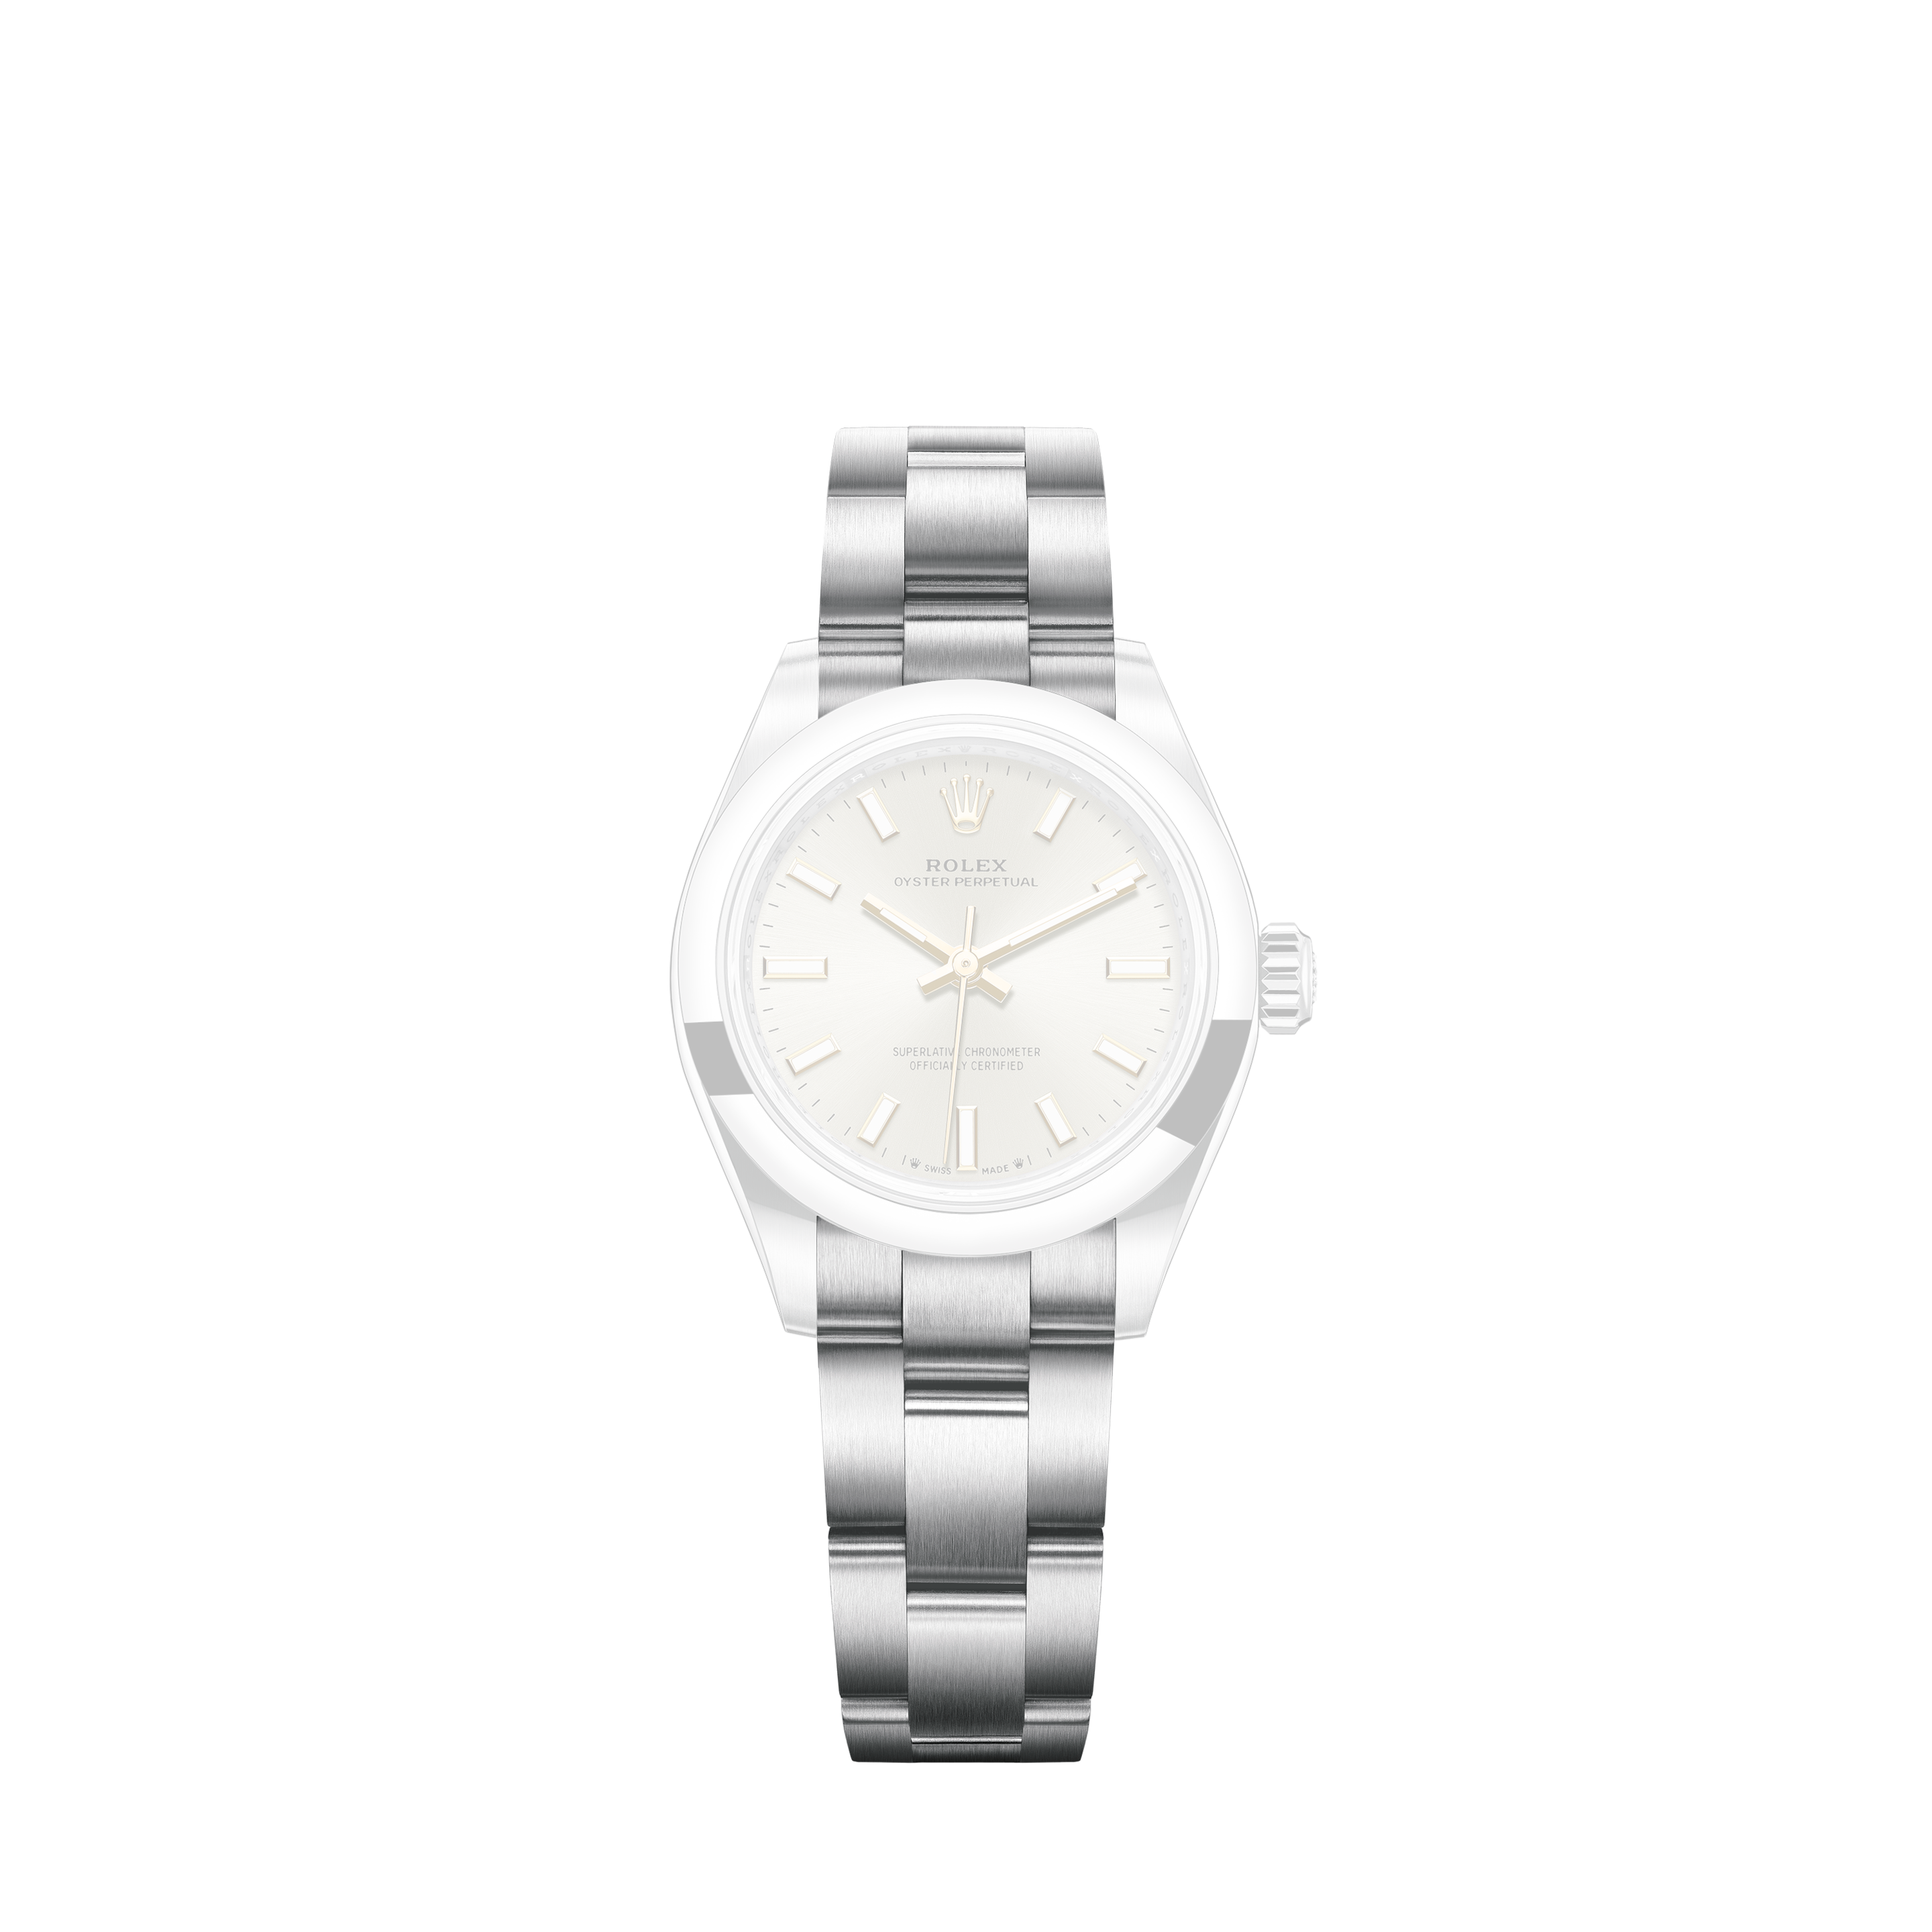 Rolex Men's Rolex 36mm Datejust Two Tone Jubilee White Roman Numeral Dial Bezel + Lugs + SapphireRolex Men's Rolex 36mm Datejust Two Tone Vintage Fluted Bezel With Lugs Baby Blue MOP Mother Of Pearl Baguette Dial